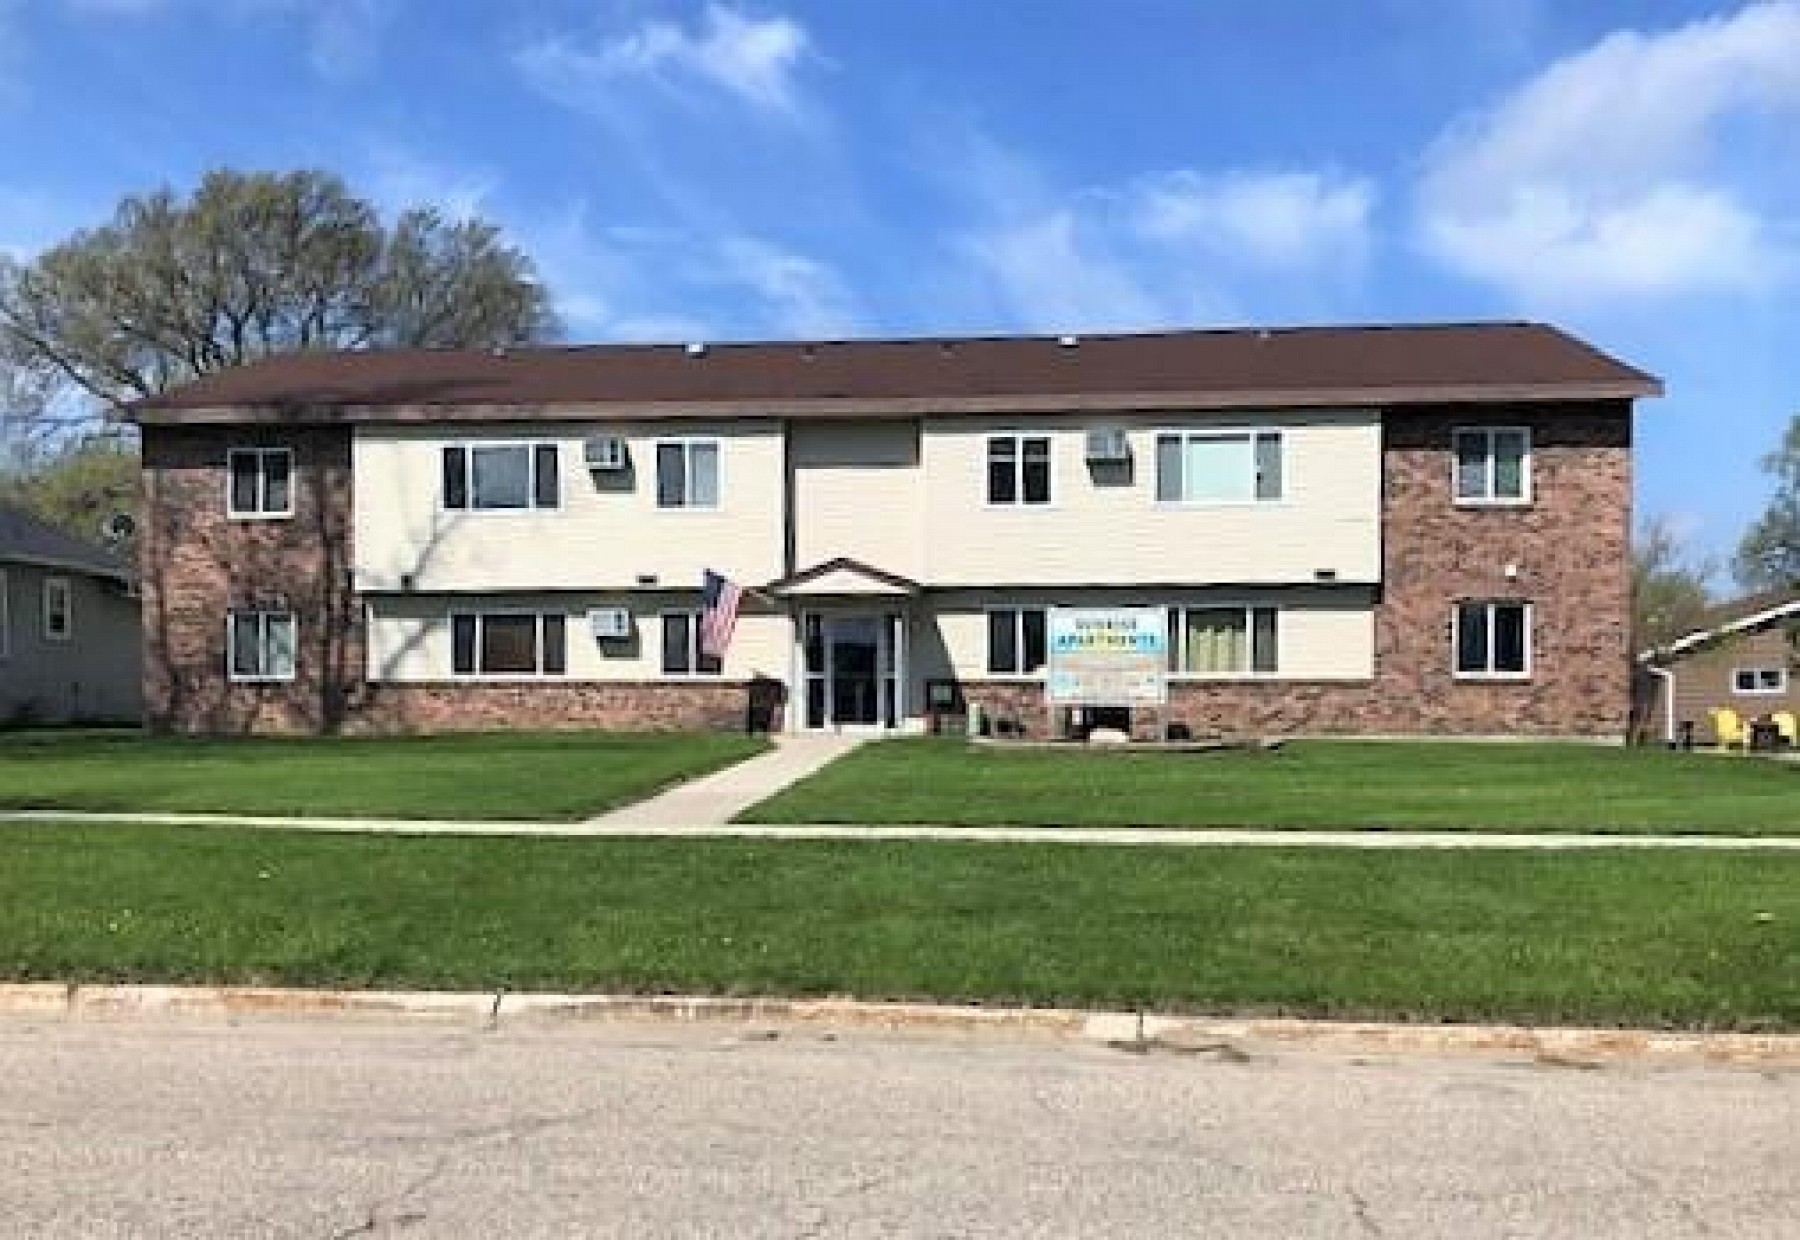 120 6th Avenue S, Brookings, SD 57006